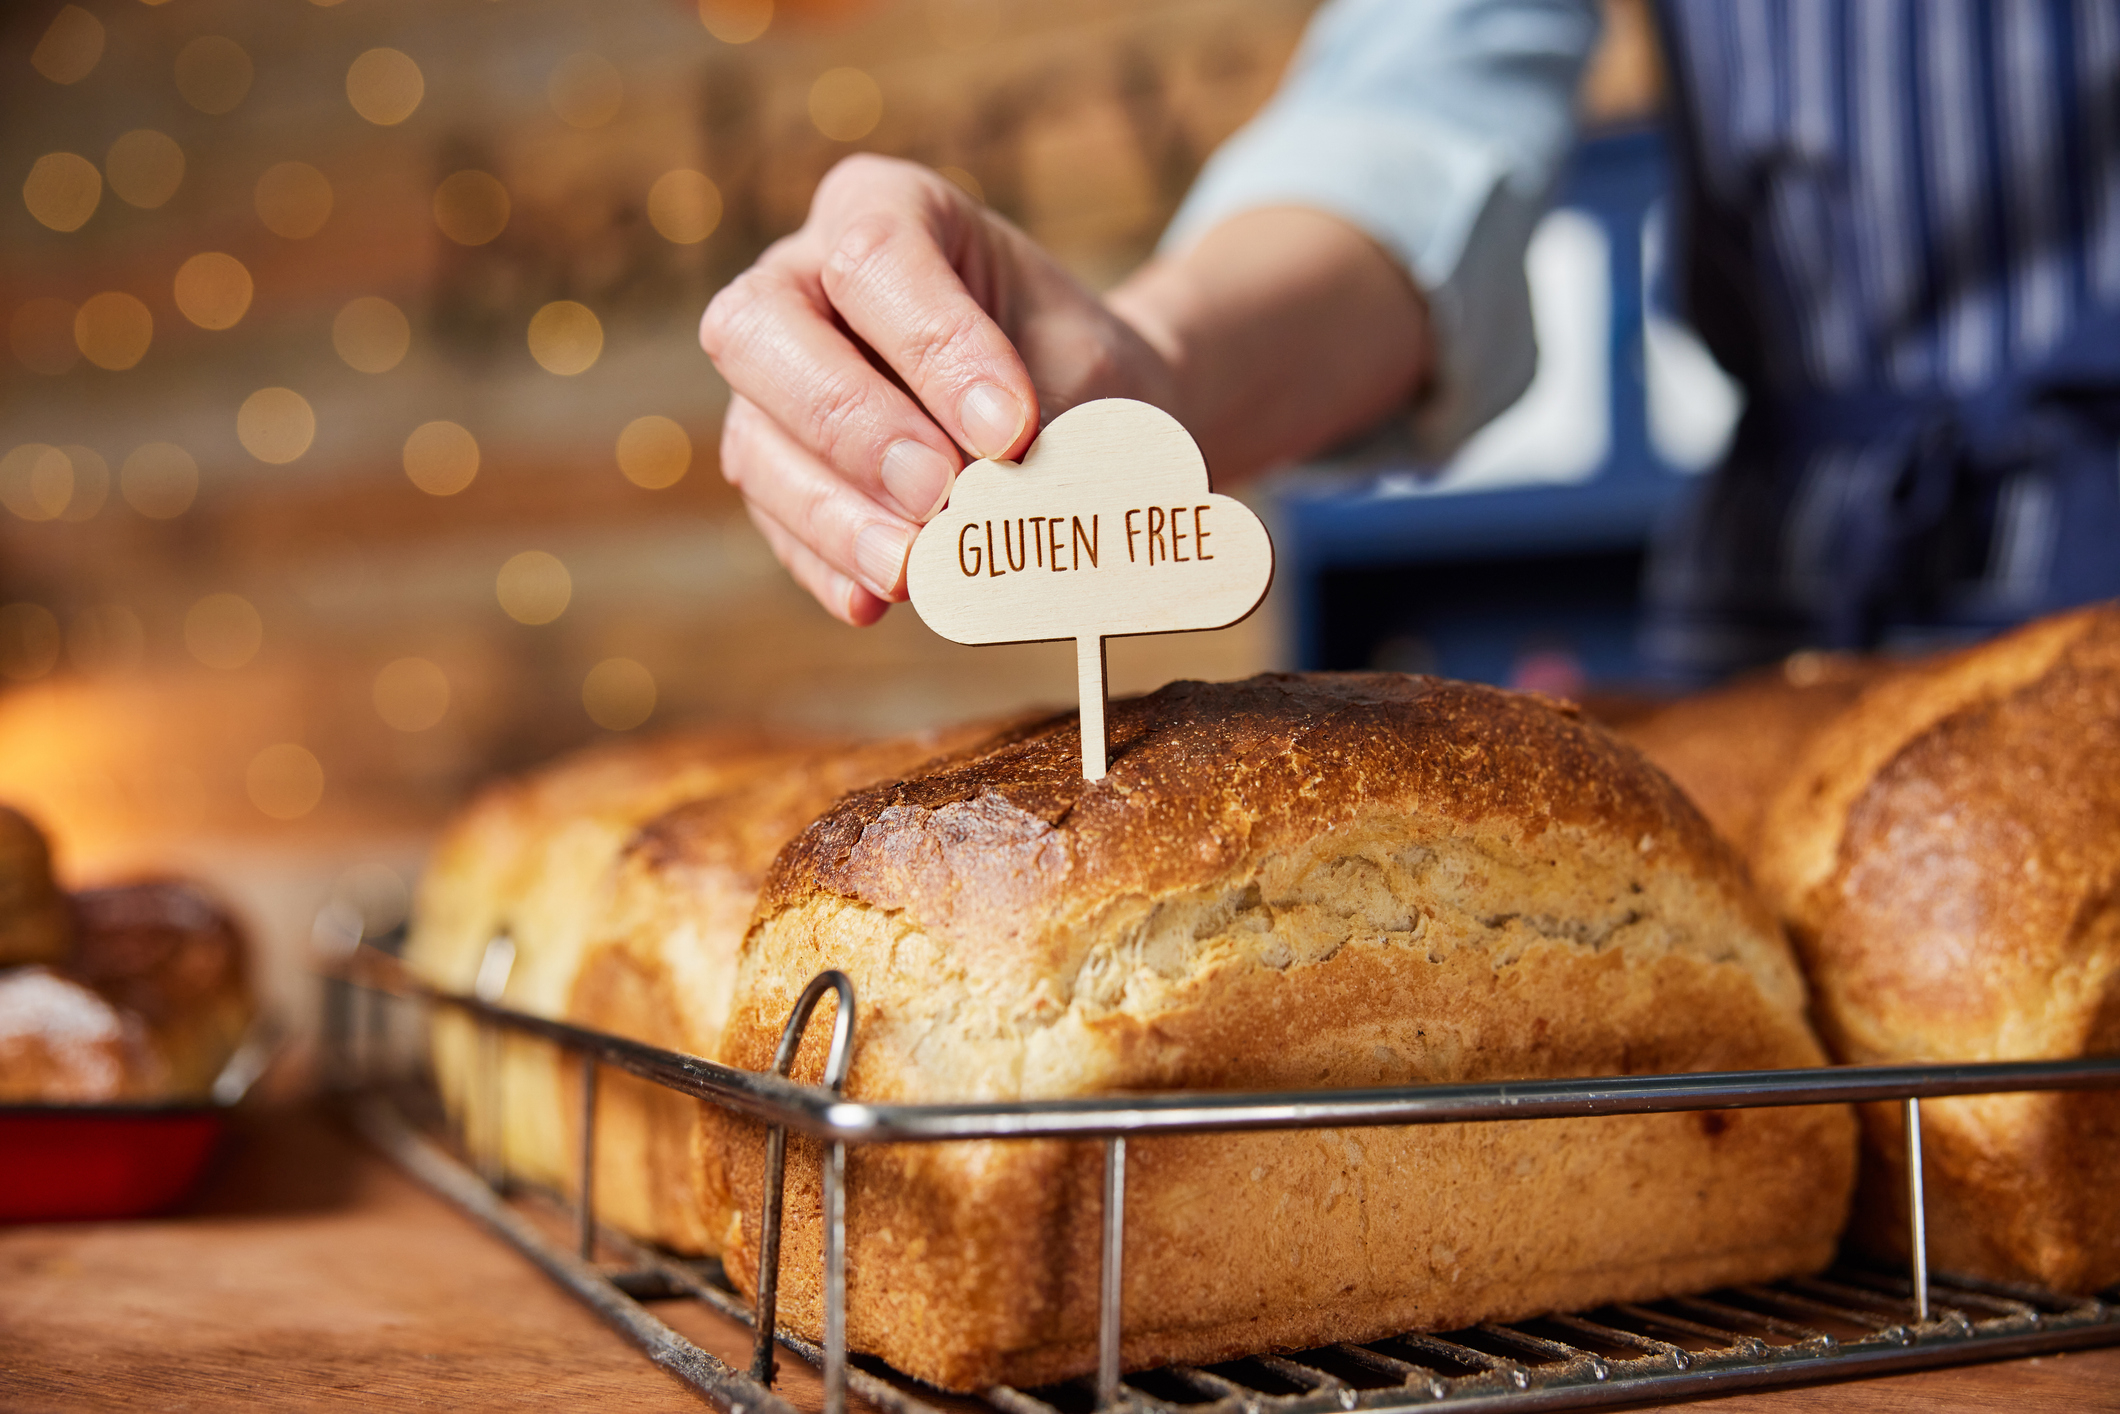 Hand placing a &quot;gluten-free&quot; sign on freshly baked loaves of bread in a bakery display